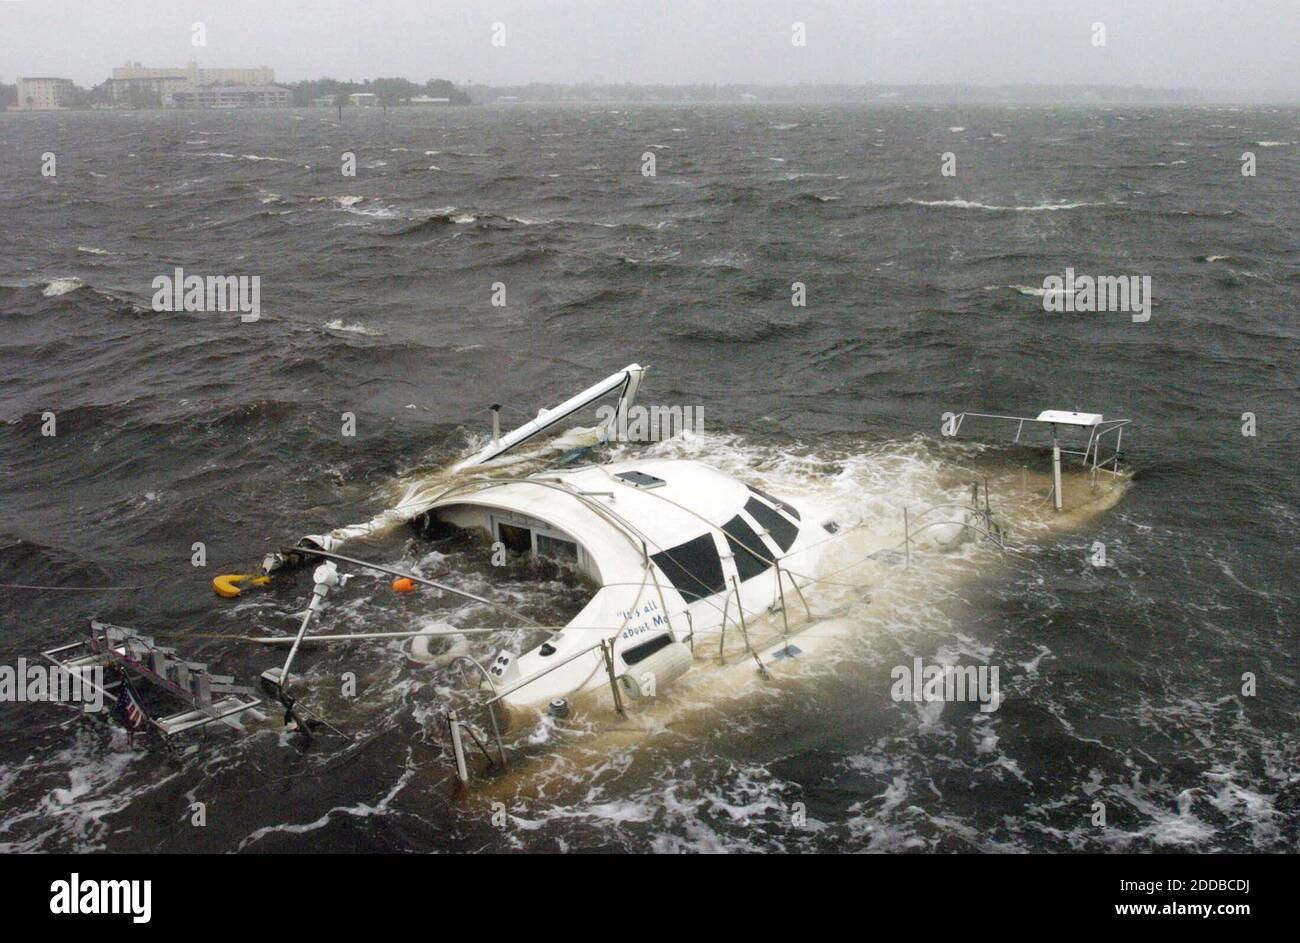 NO FILM, NO VIDEO, NO TV, NO DOCUMENTARY - A sailboat rests submerged in the Manatee River after it suffered damage by Hurricane Jeanne on September 26, 2004. Photo by Grant Jefferies/Bradenton Herald/KRT/ABACA. Stock Photo